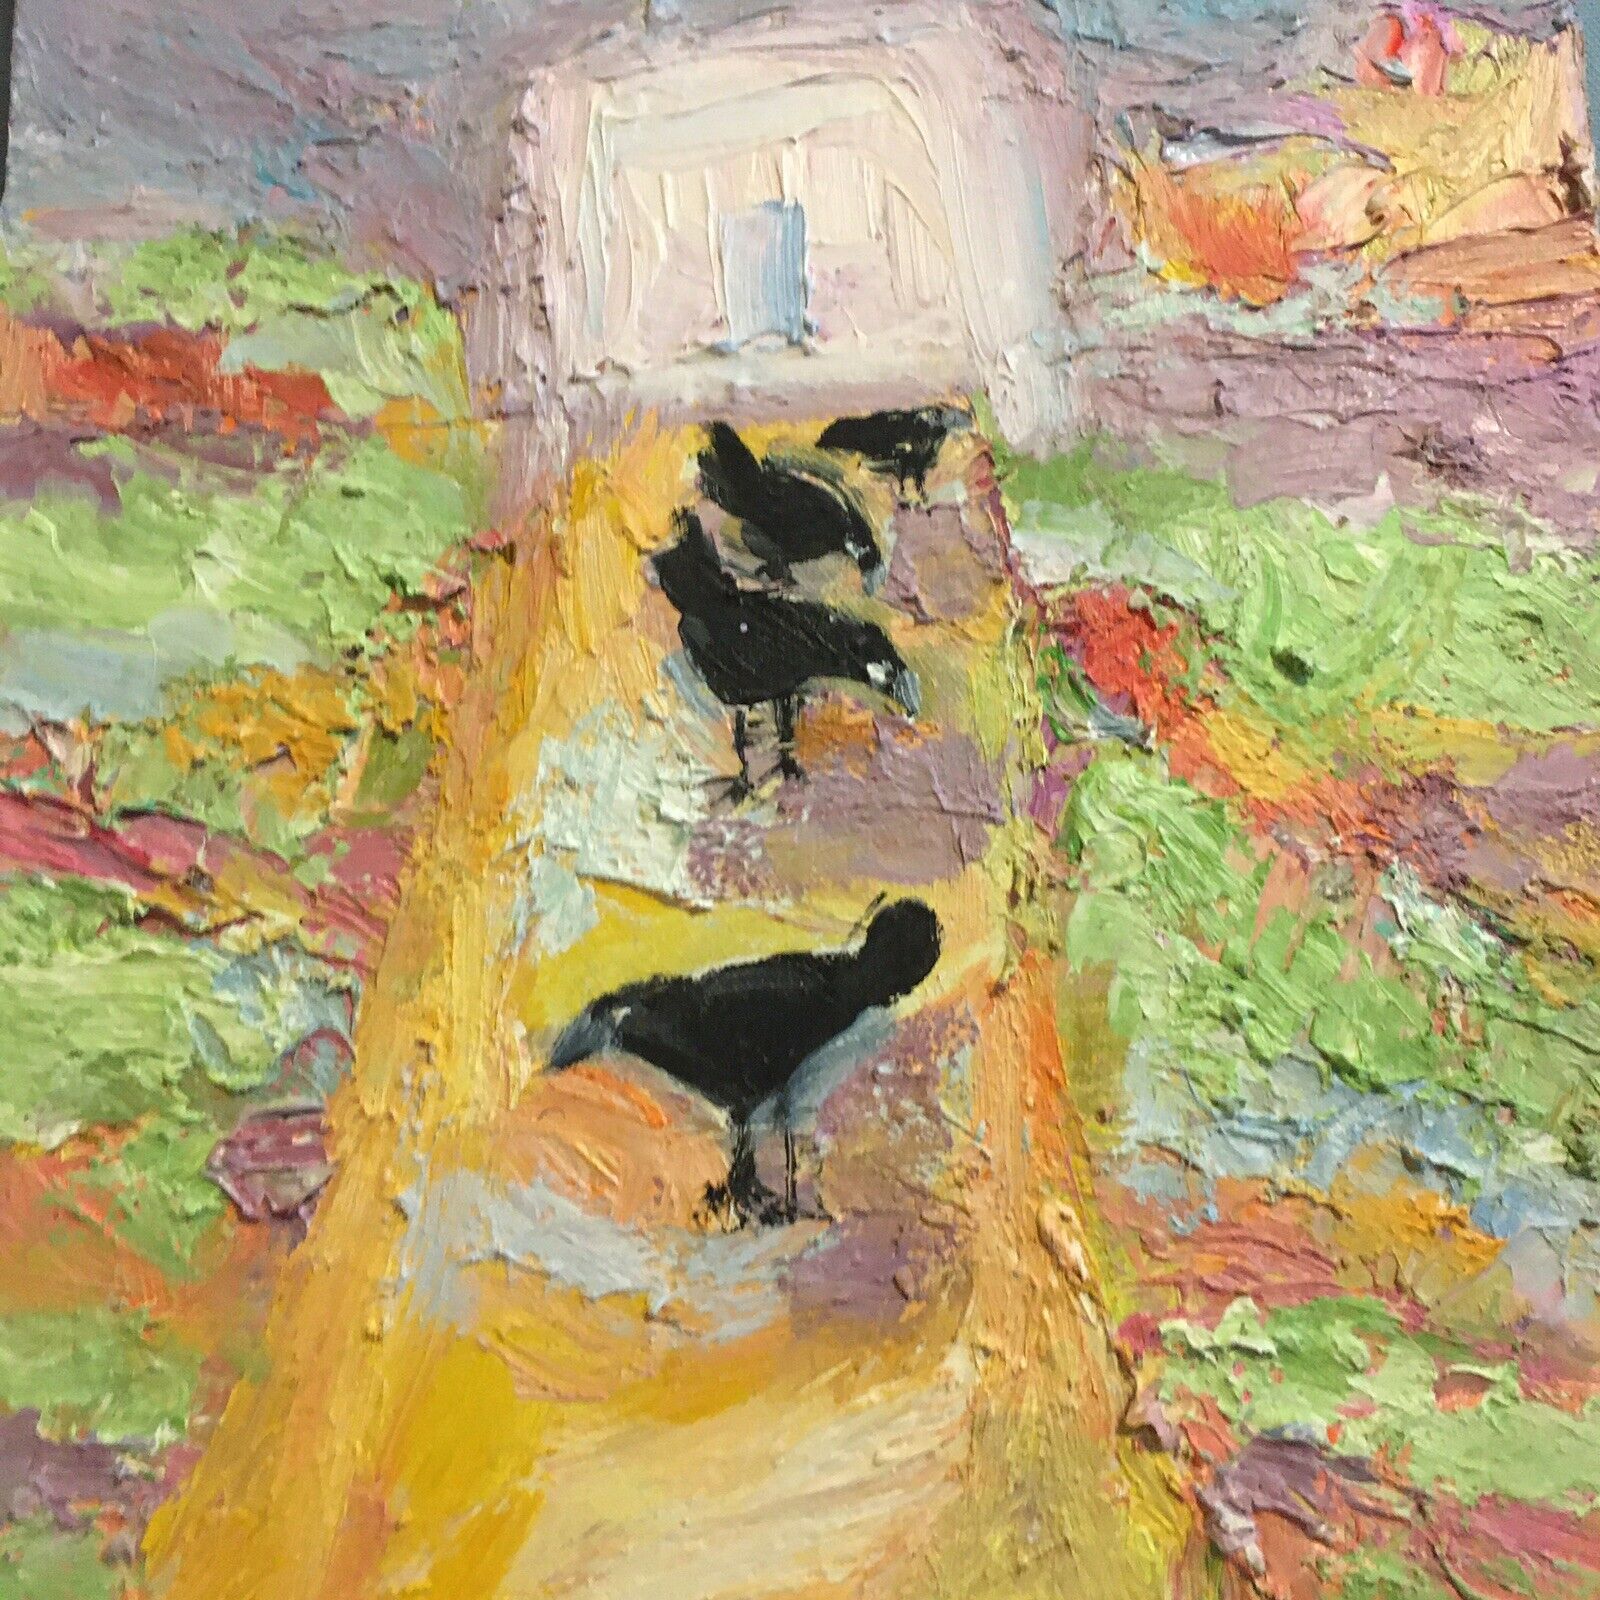 Kansas City Mall gift Crows On The Path an Painting Original 14”x11” Oil